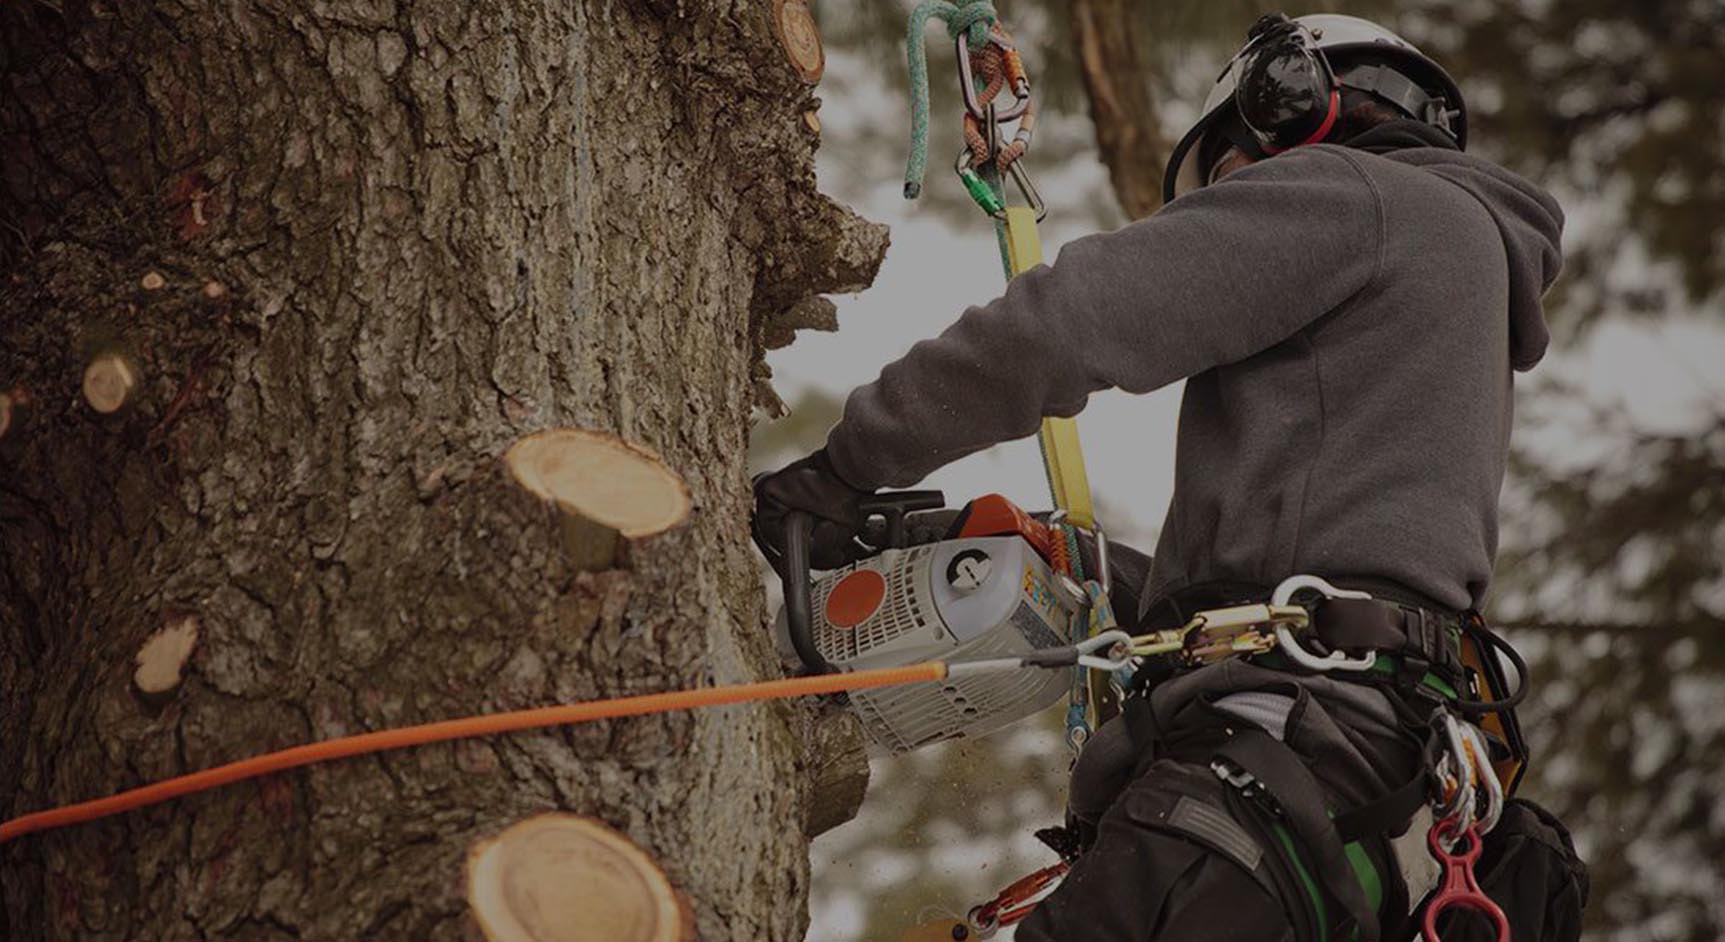 Tree Service, Tree Removal Services and Firewood Supplier